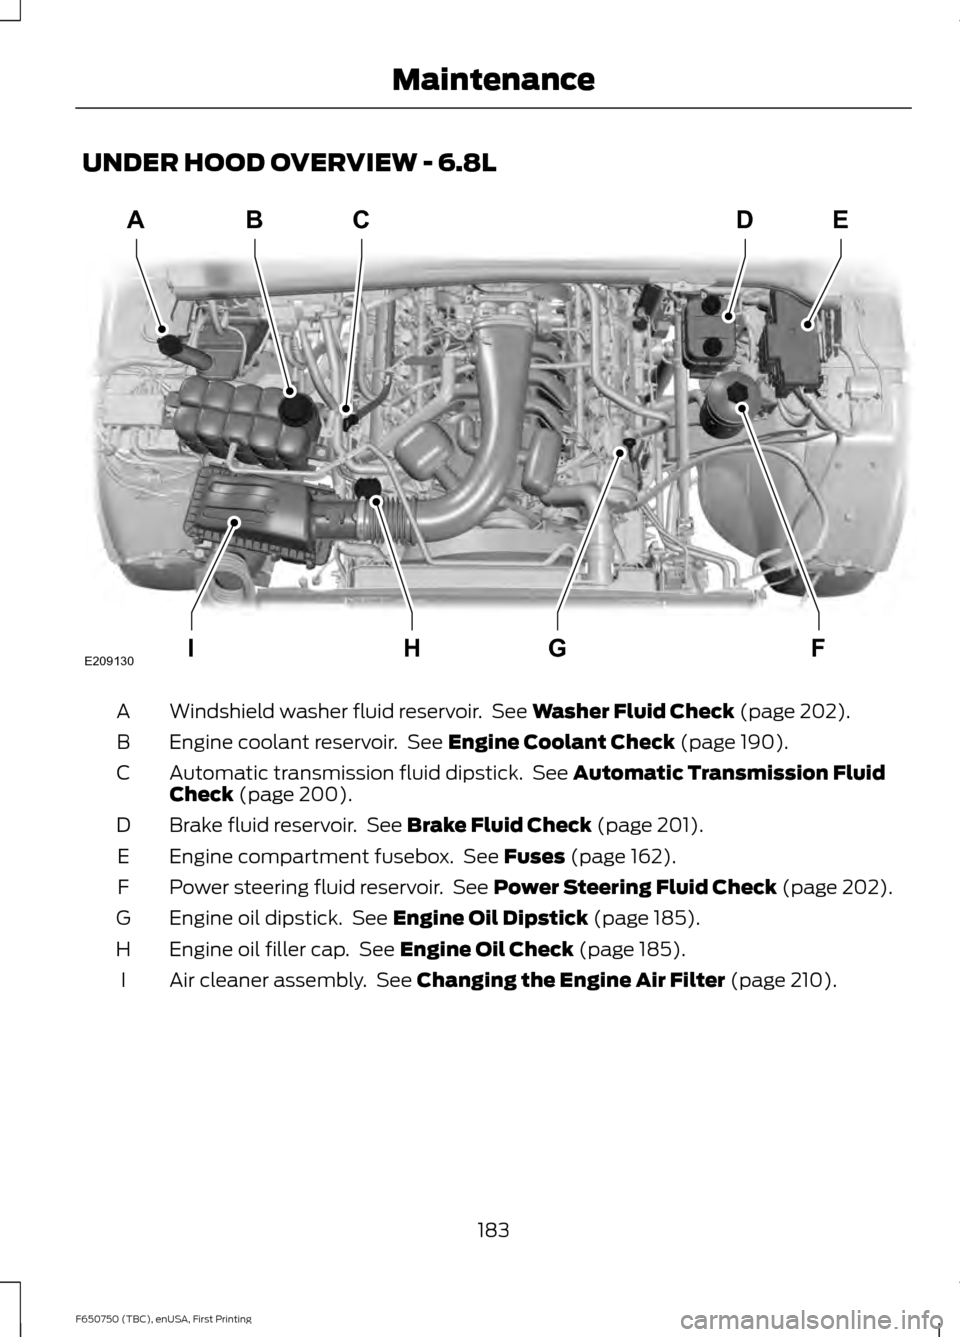 FORD F650 2016 13.G Owners Manual UNDER HOOD OVERVIEW - 6.8L
Windshield washer fluid reservoir.  See Washer Fluid Check (page 202).
A
Engine coolant reservoir.  See 
Engine Coolant Check (page 190).
B
Automatic transmission fluid dips